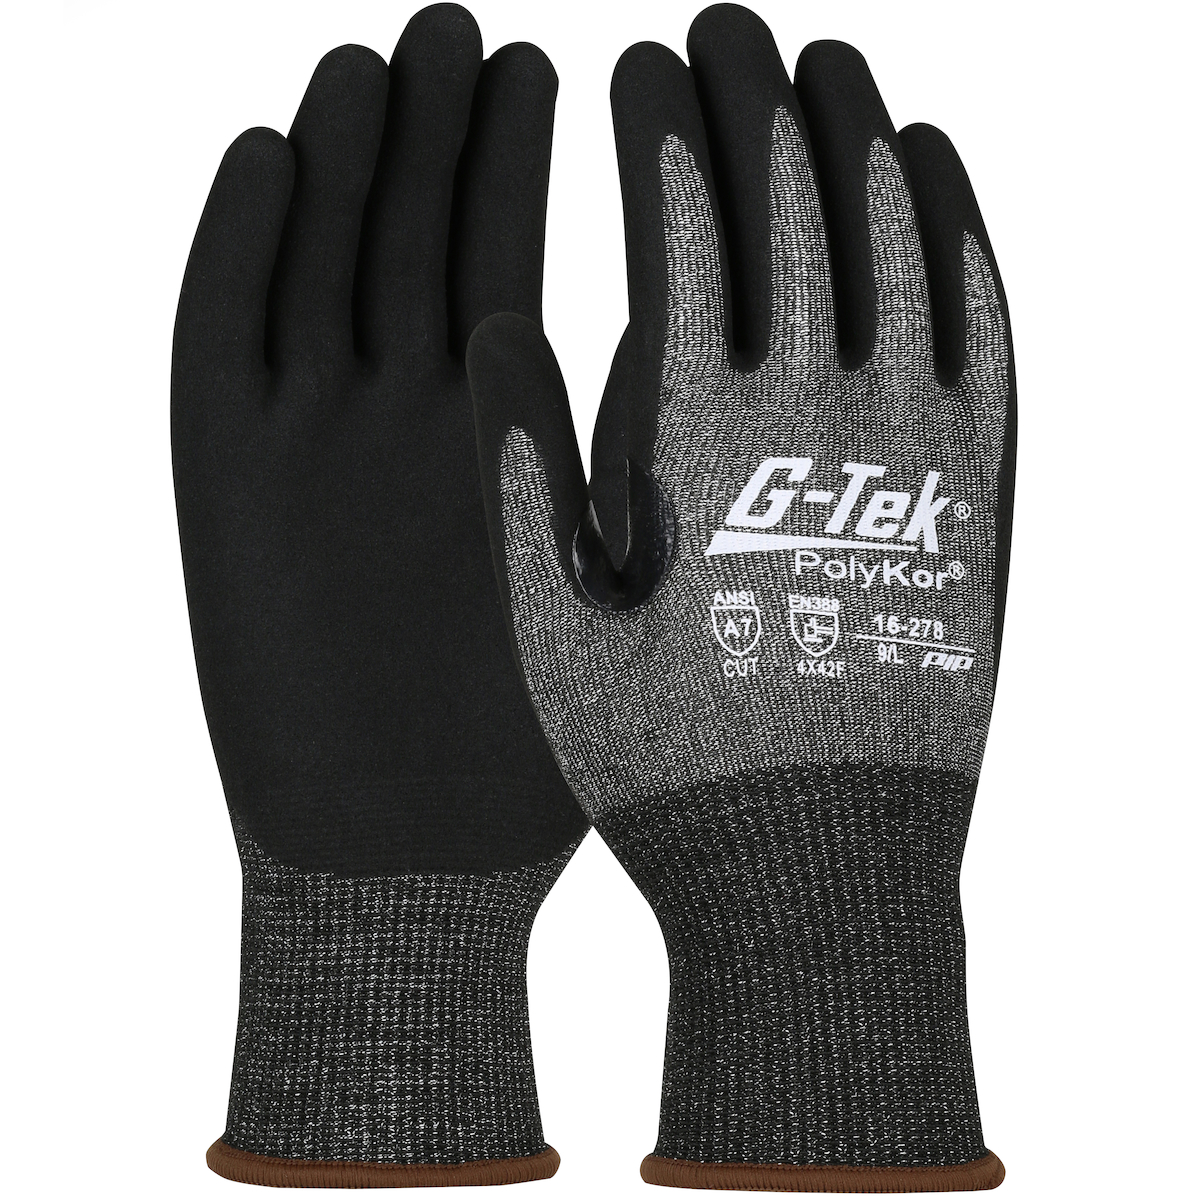 #16-278 PIP® G-Tek®  Seamless Knit PolyKor® X7™ Glove with Nitrile Coated MicroSurface Grip on Palm & Fingers - Touchscreen Compatible 